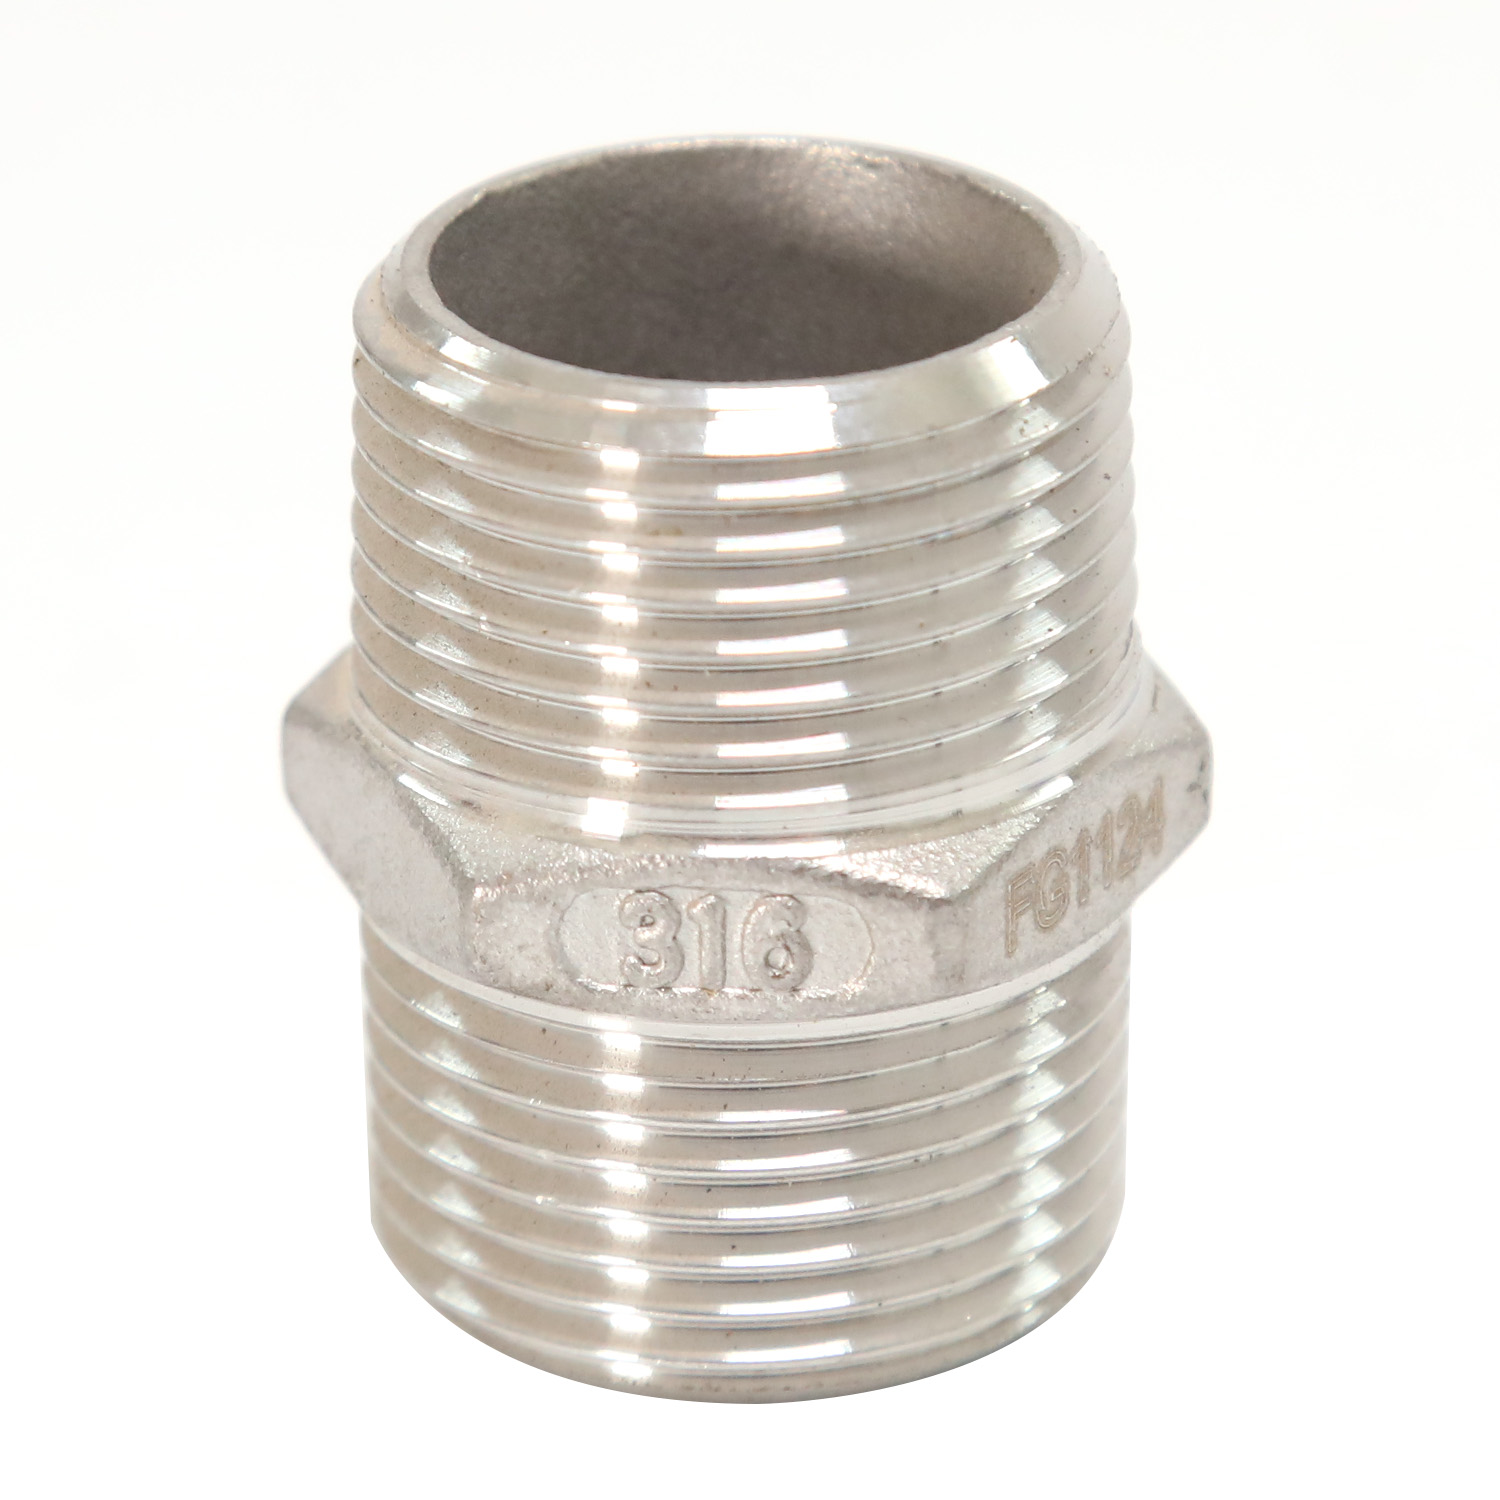 Stainless Steel Pipe Fitting Thread Screw Hex Nipple